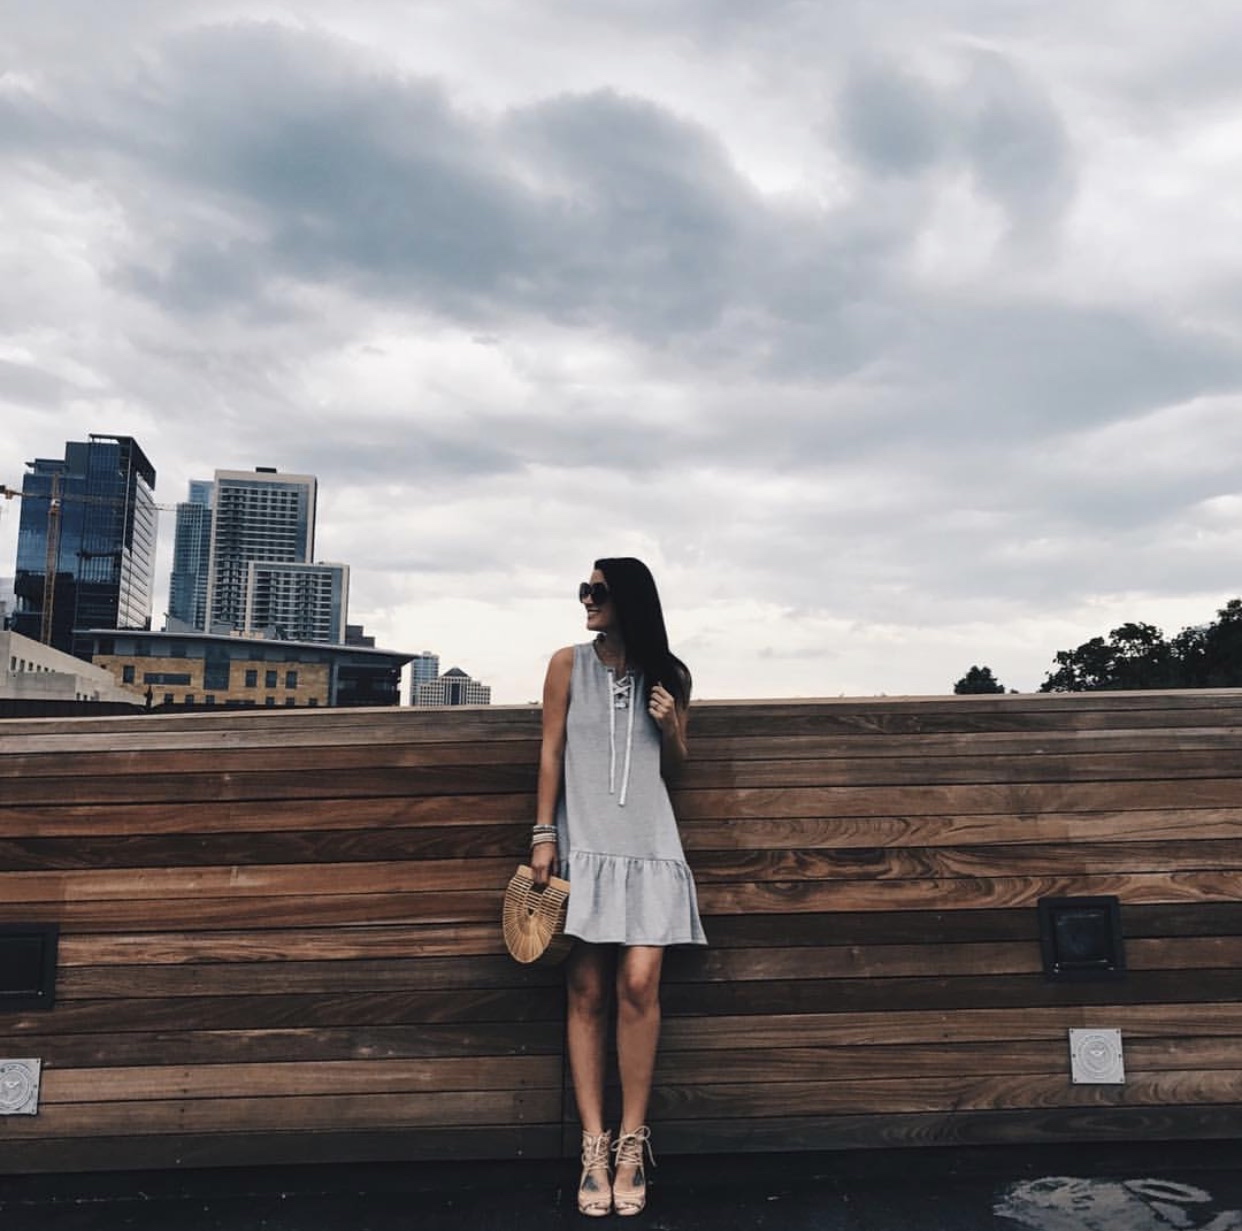 DTKAustin shares her latest Instagram fashion posts from June. Sales, great deals and fabulous looks await. Click for more information and photos.